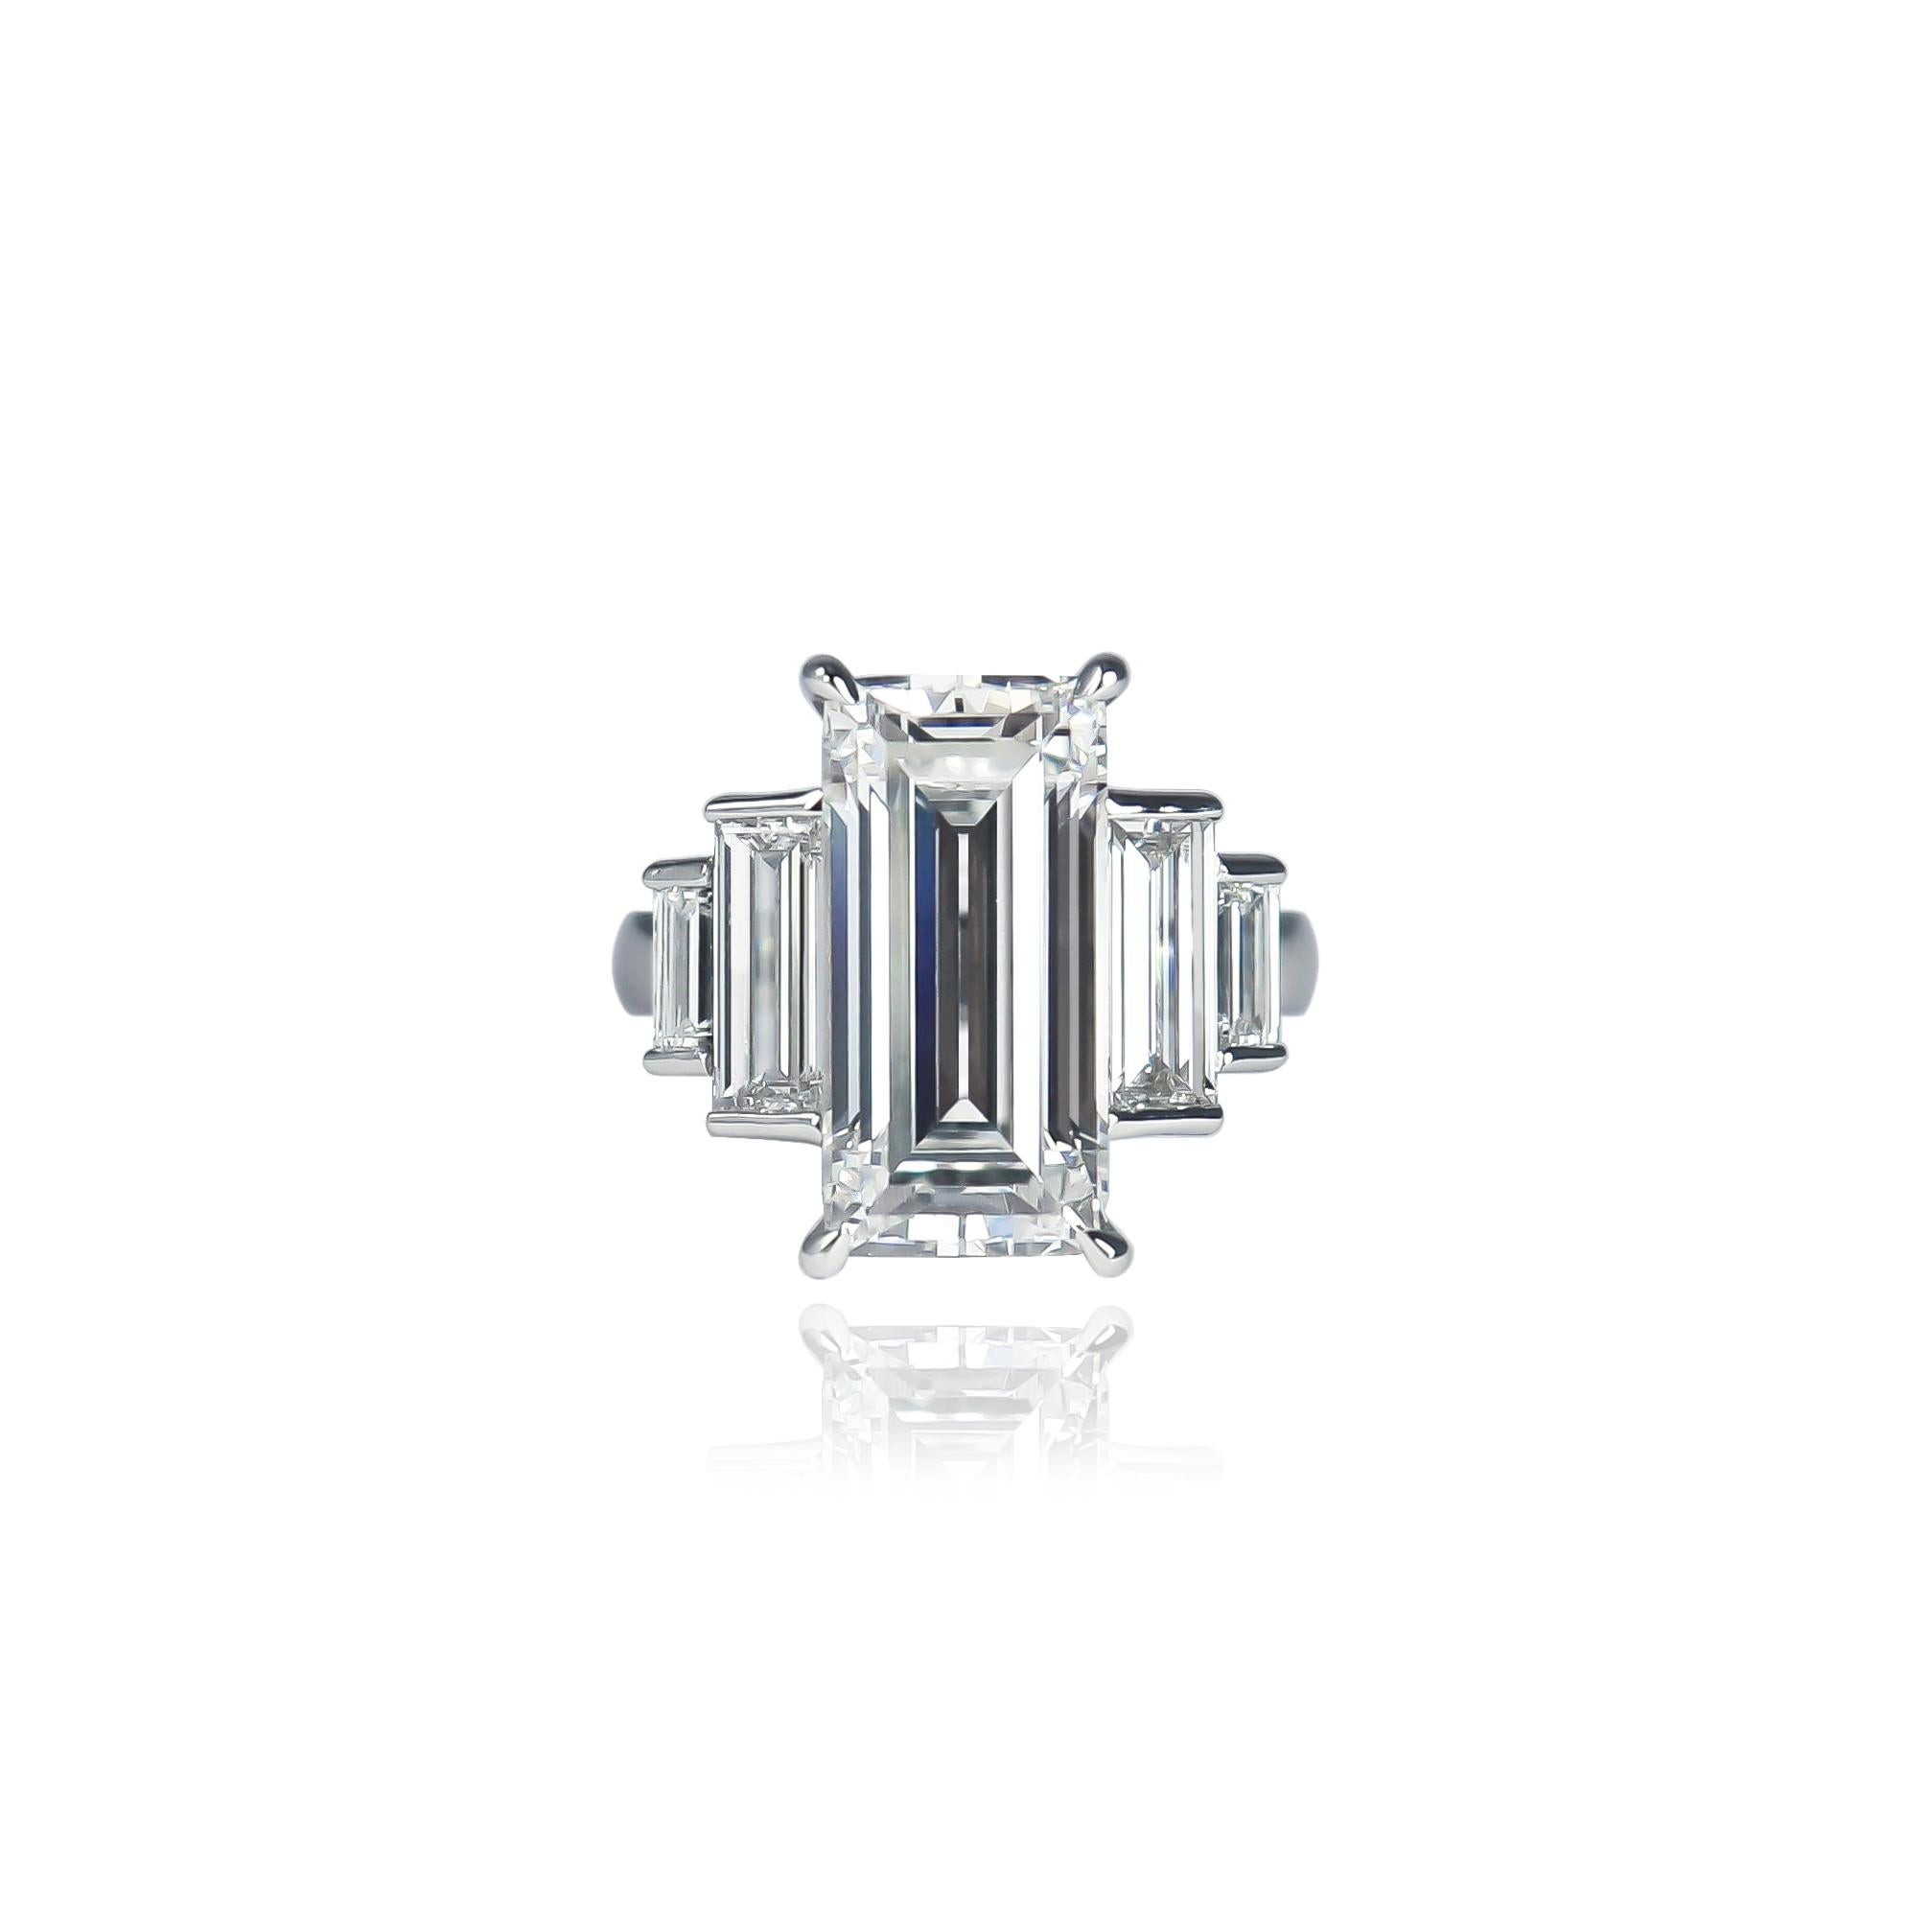 This incredible, new ring from the J. Birnbach workshop features a GIA certified 5.61 carat emerald cut diamond of E color and SI1 clarity. Set in a thoughtfully designed Art Deco style ring with straight baguette diamonds = 1.49 carat total weight,